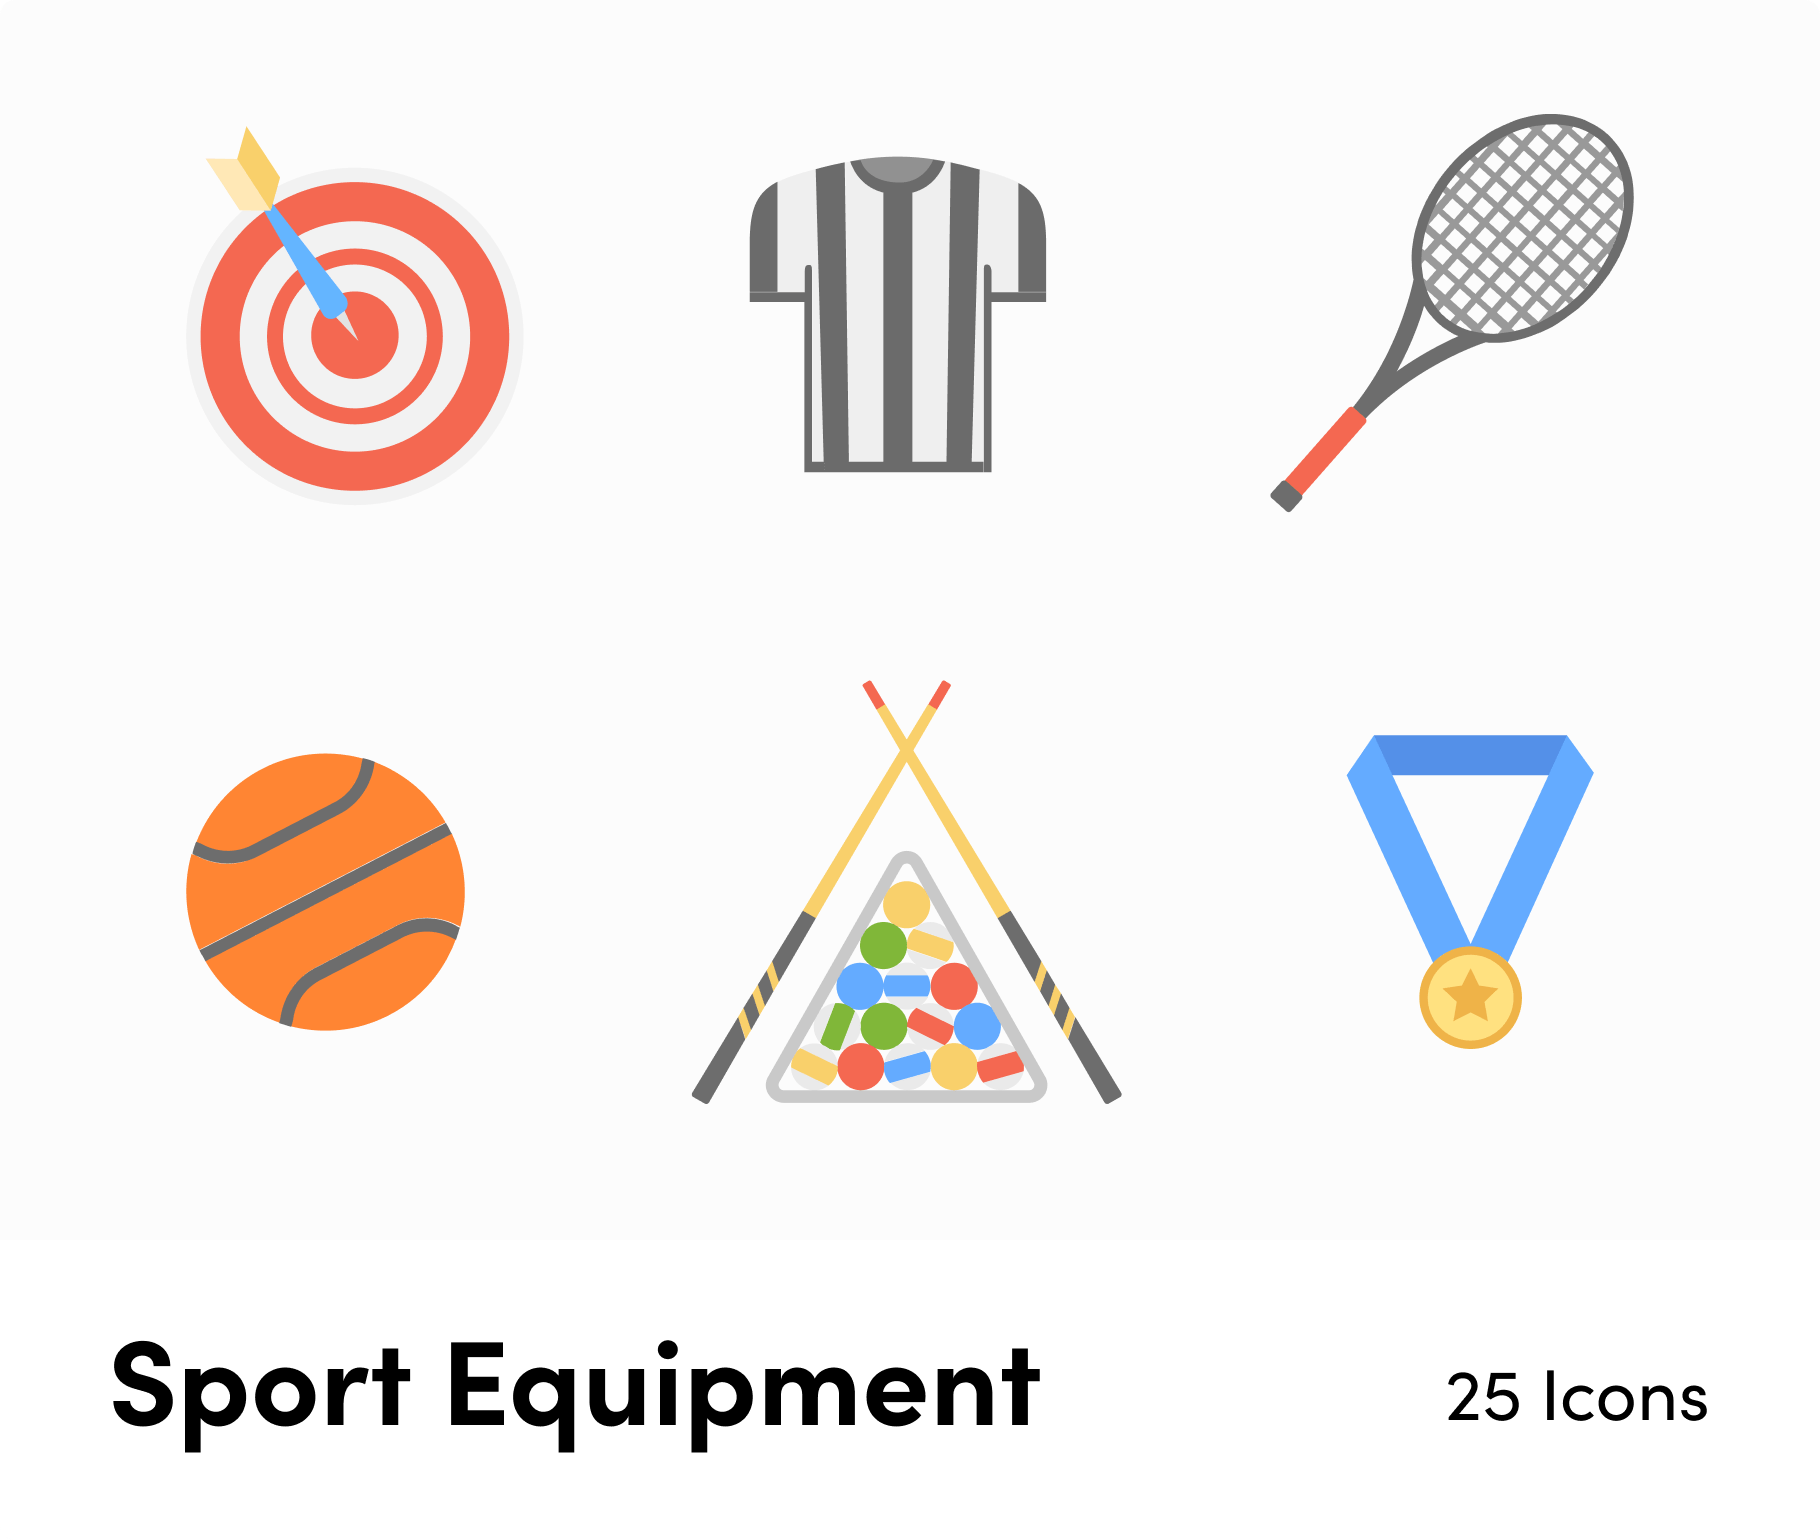 Sport Equipment-Flat-Vector-Icons Icons Sport Equipment Flat Vector Icons S01142202 powerpoint-template keynote-template google-slides-template infographic-template